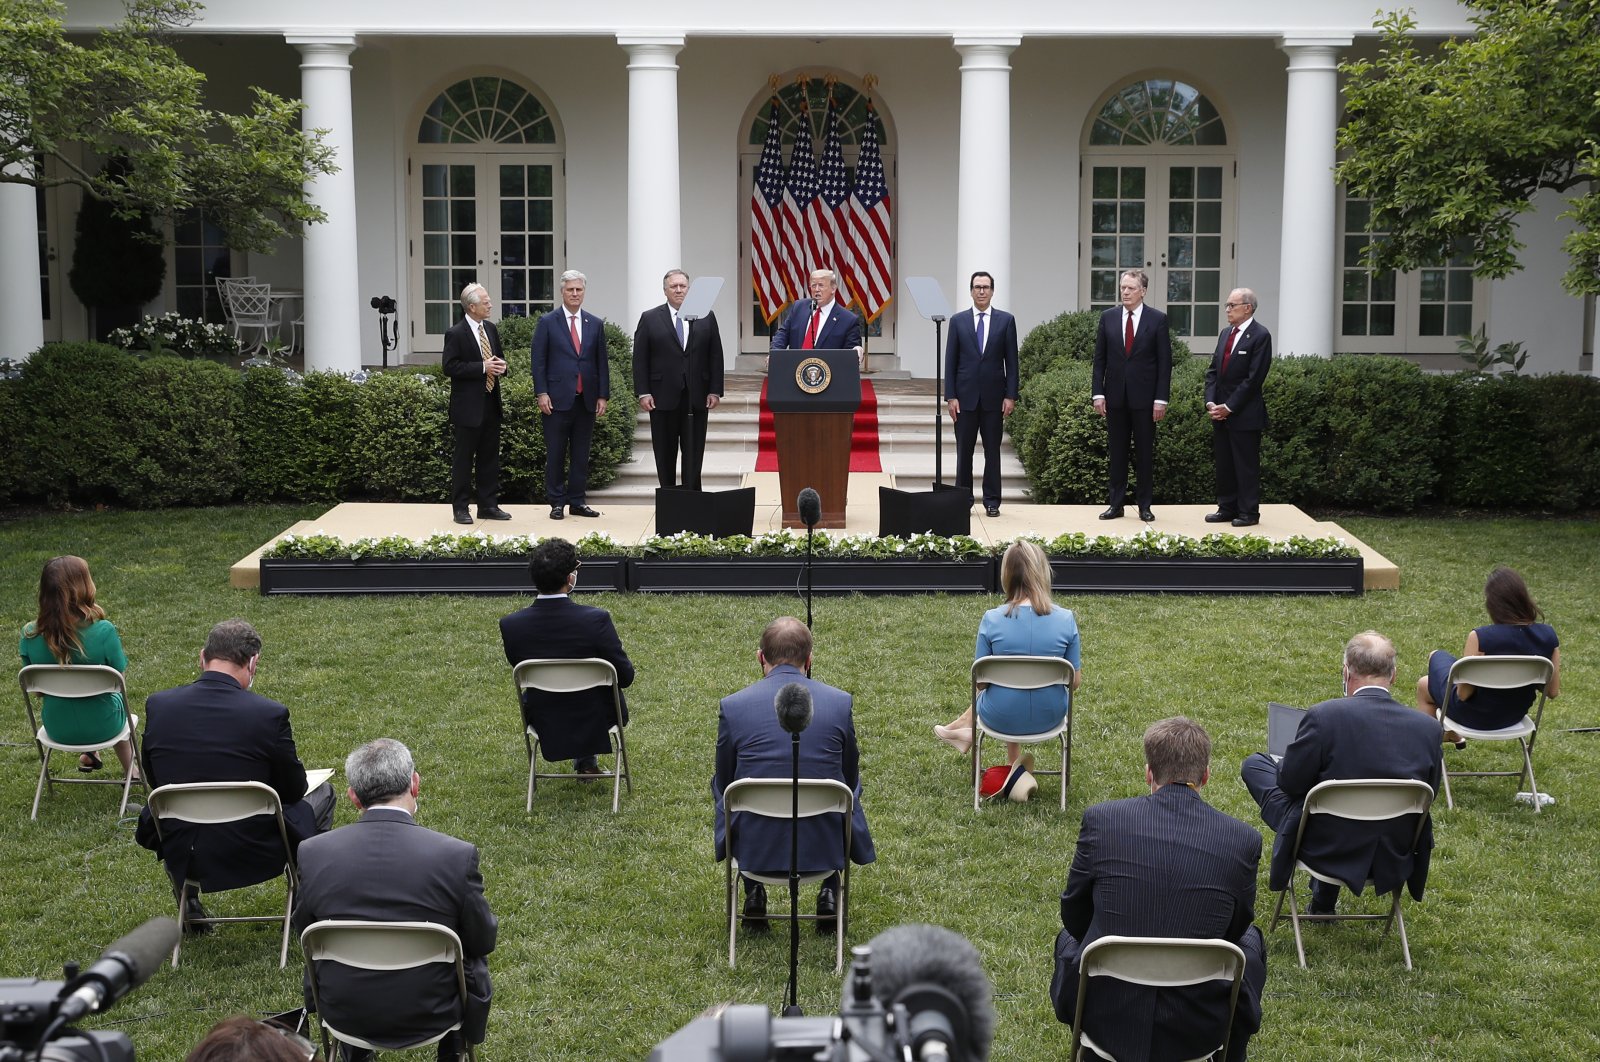 U.S. President Donald Trump speaks in the Rose Garden of the White House, Washington D.C., May 29, 2020. (AP Photo)